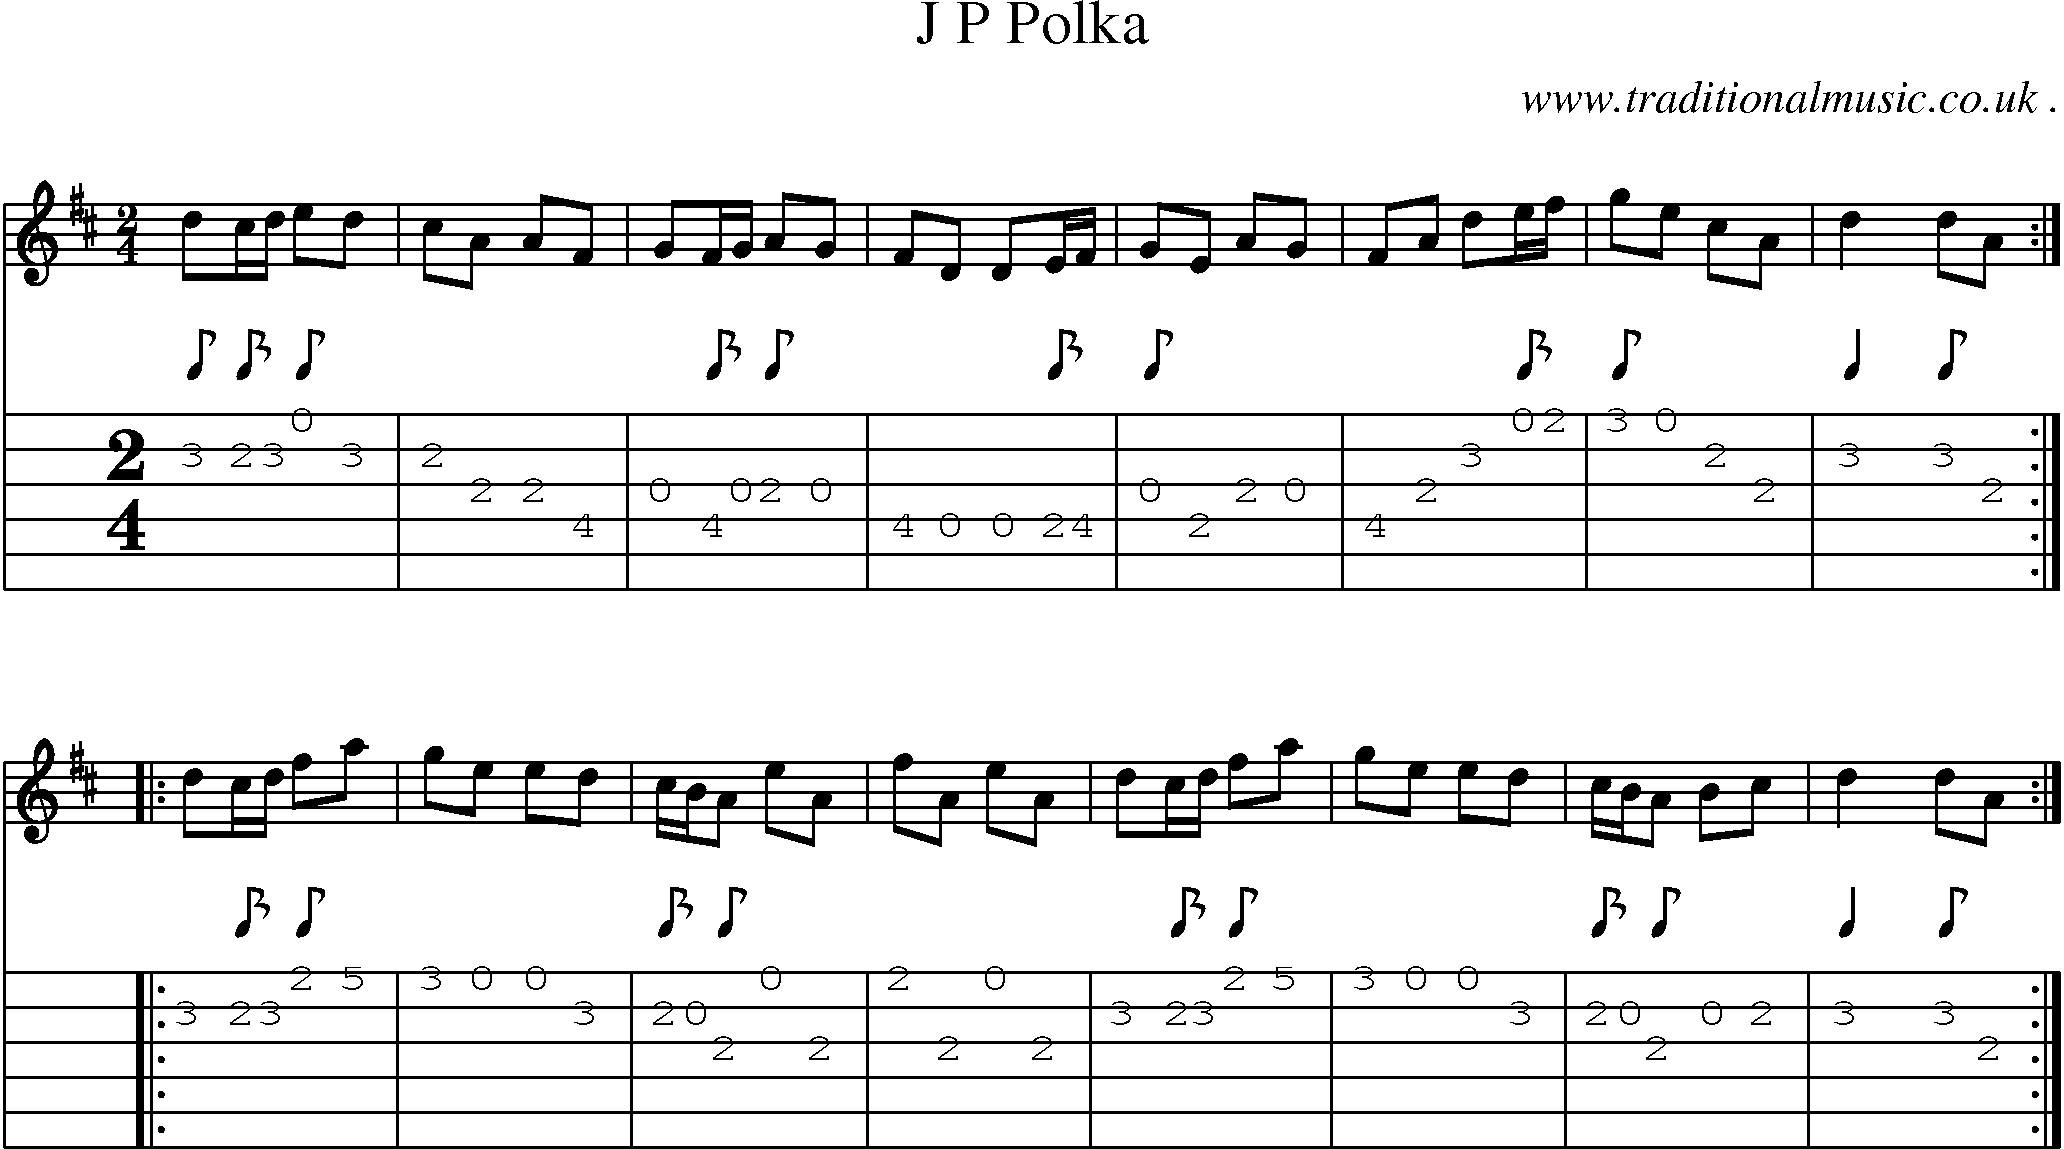 Sheet-Music and Guitar Tabs for J P Polka